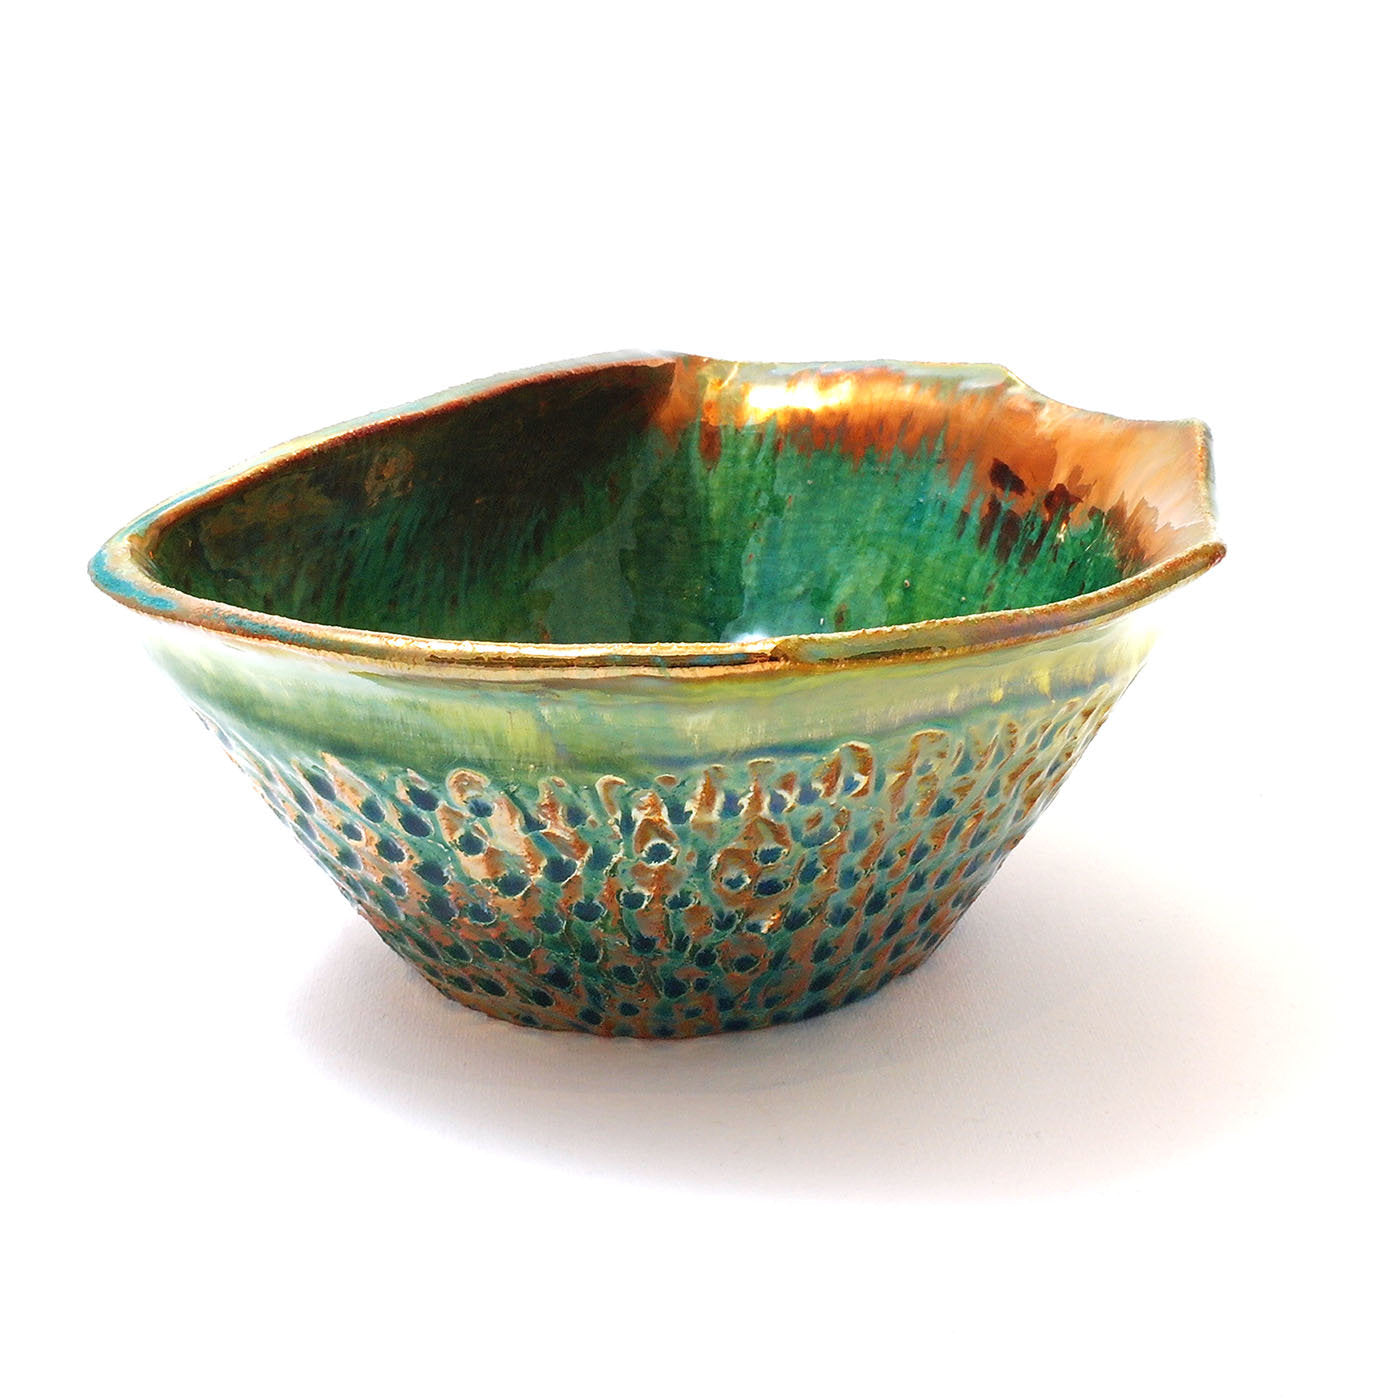 Small Multi-faceted Green Bowl - Alternative view 1